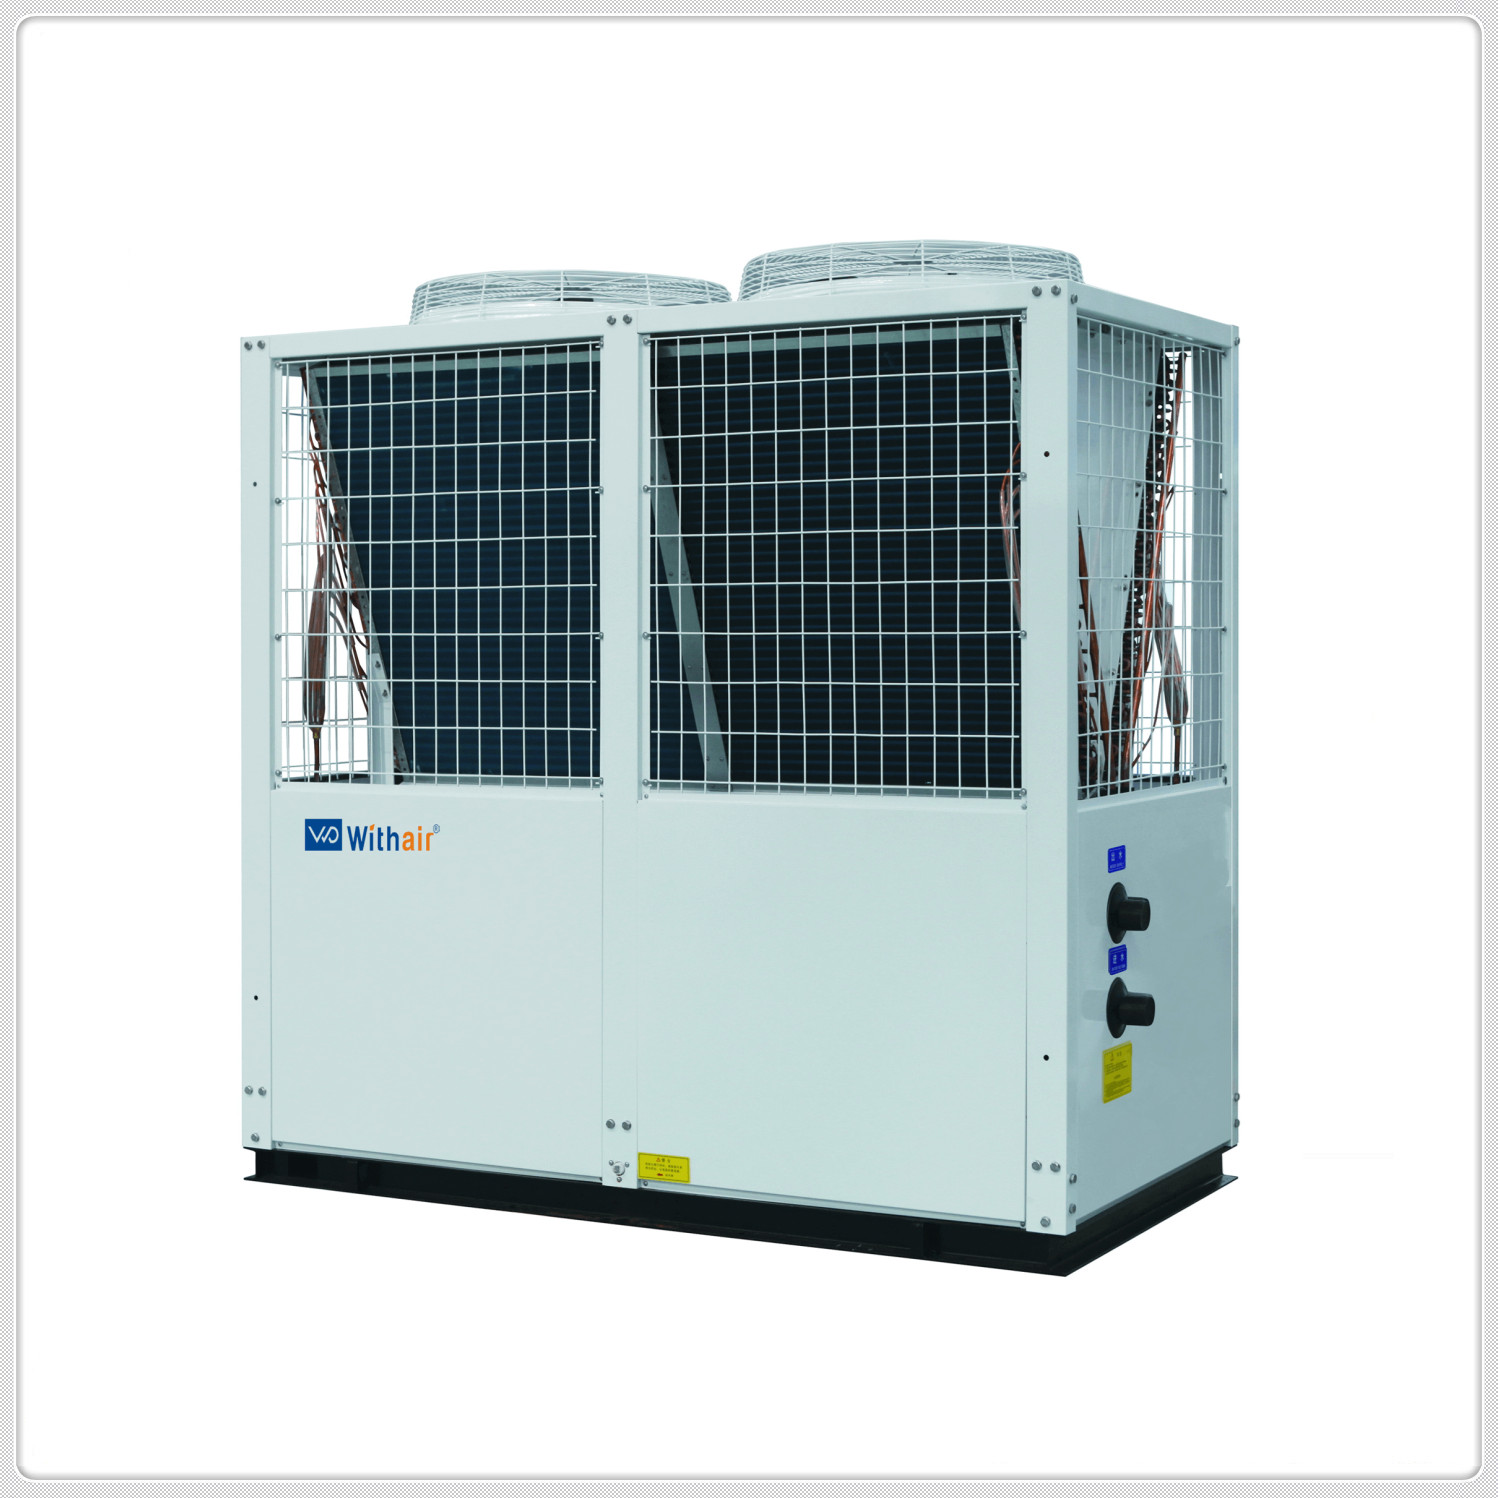 Withair® Heating & Cooling Systems